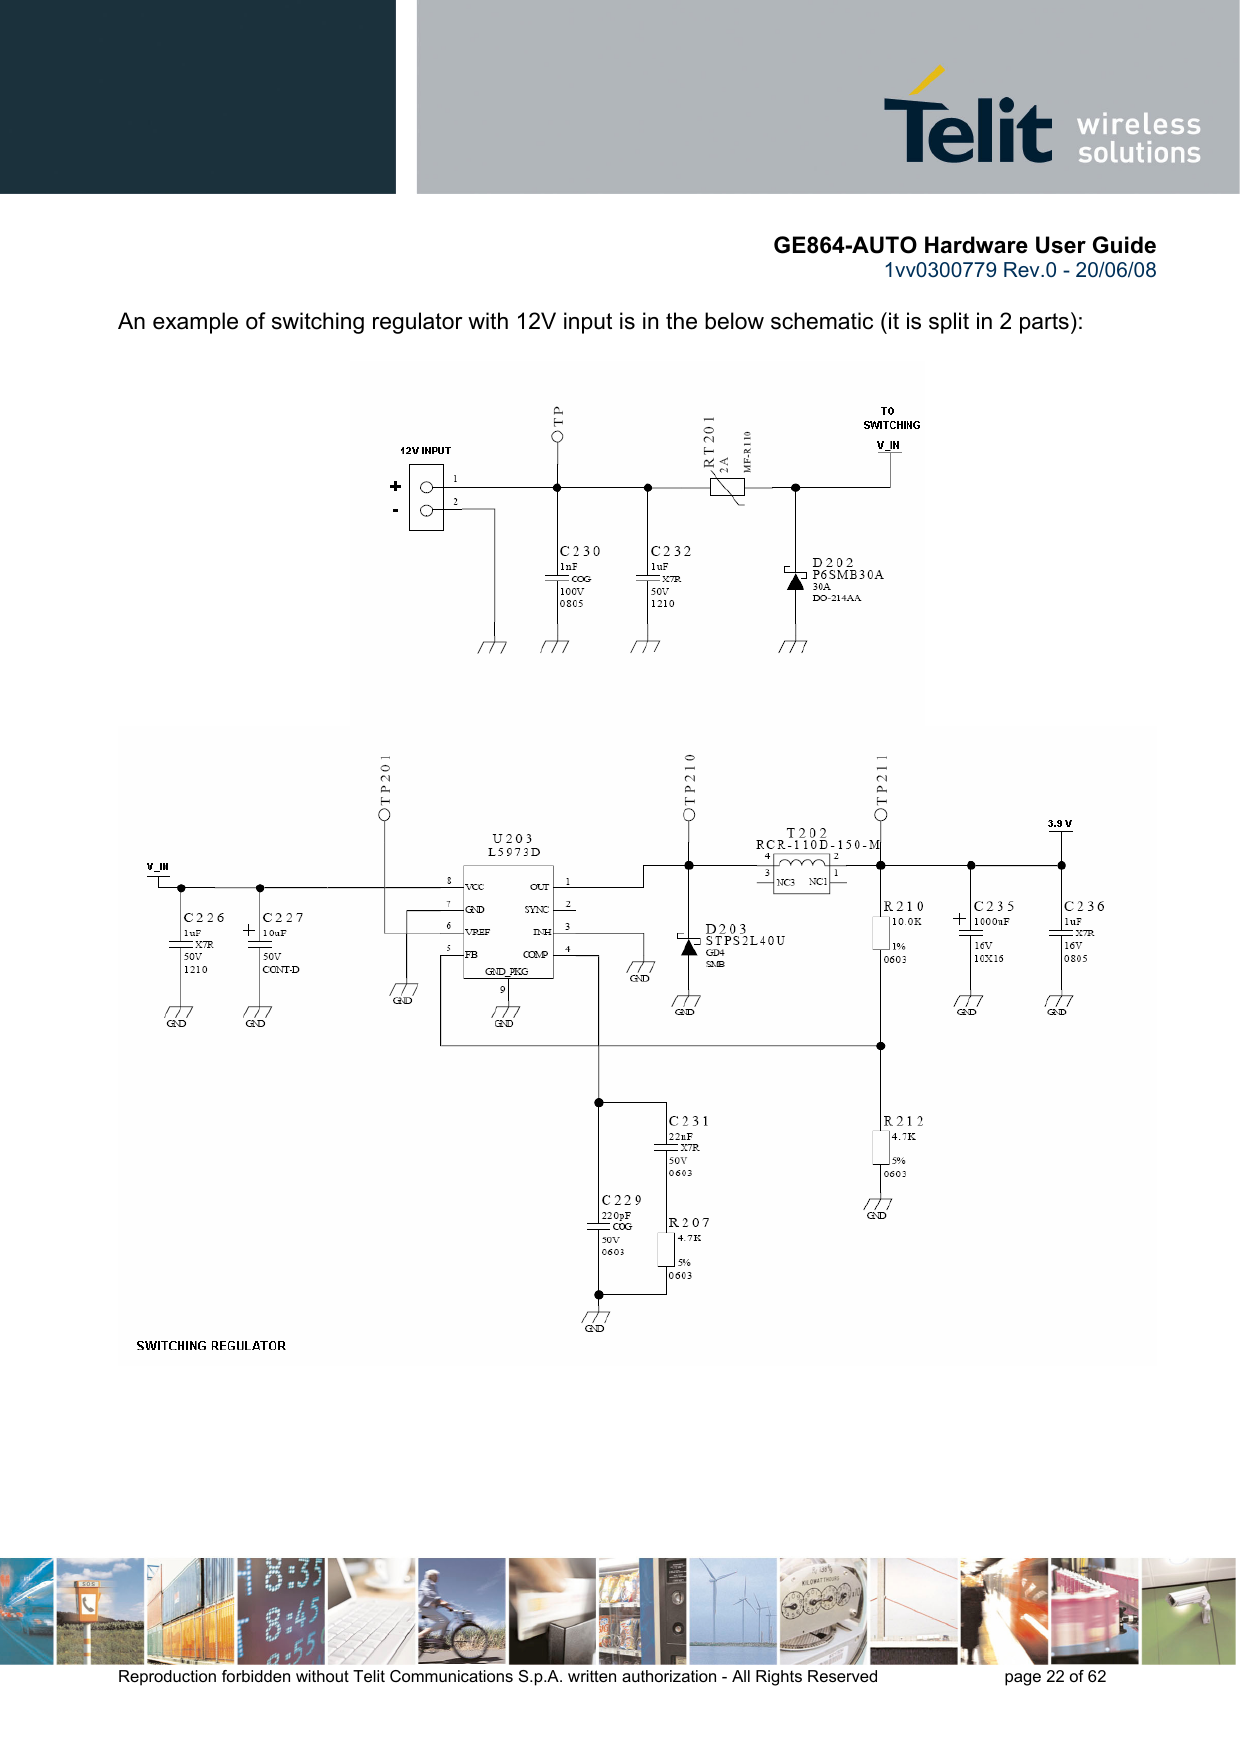       GE864-AUTO Hardware User Guide 1vv0300779 Rev.0 - 20/06/08      Reproduction forbidden without Telit Communications S.p.A. written authorization - All Rights Reserved    page 22 of 62   An example of switching regulator with 12V input is in the below schematic (it is split in 2 parts):          